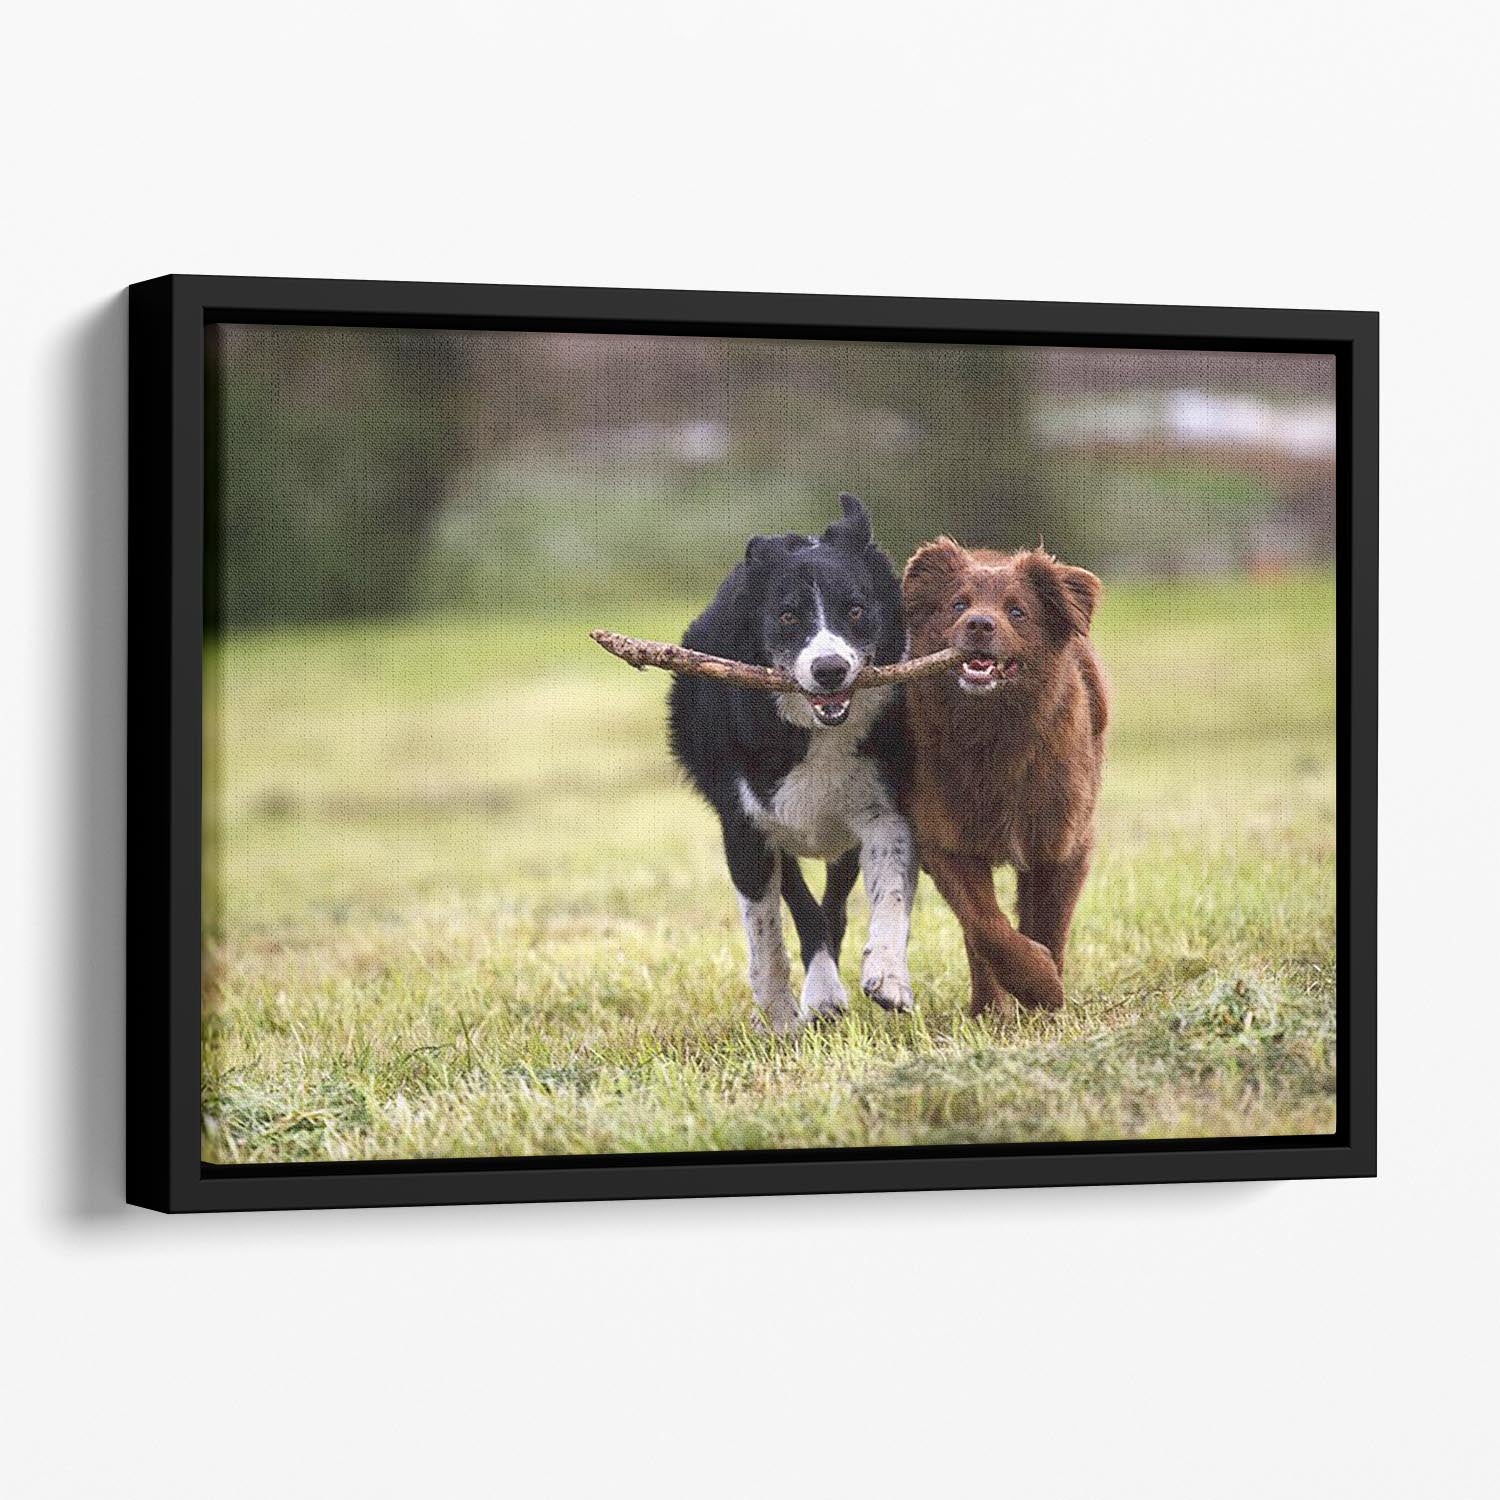 2 border collie dogs fetching a stick in open field Floating Framed Canvas - Canvas Art Rocks - 1